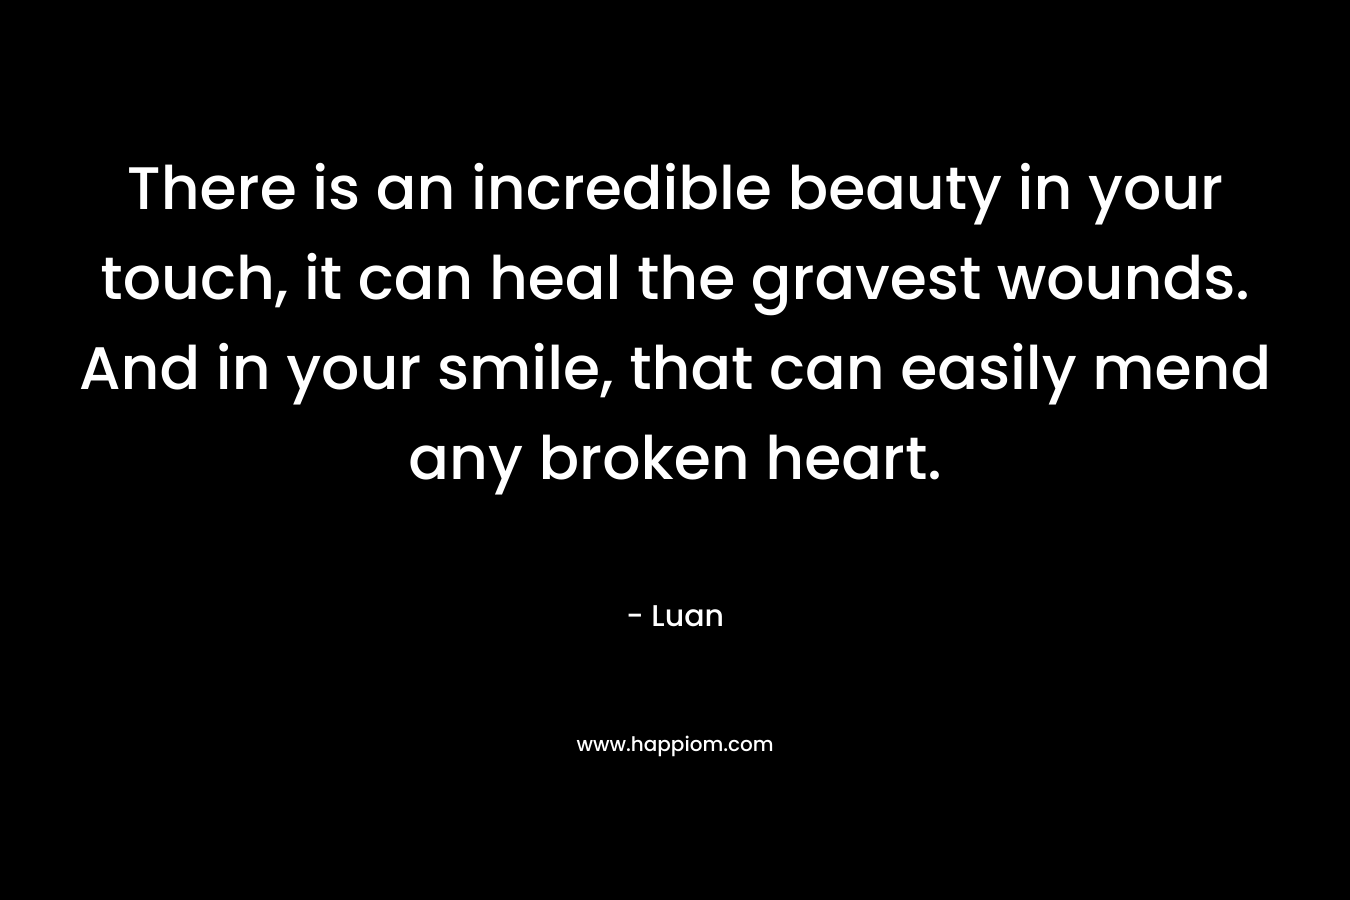 There is an incredible beauty in your touch, it can heal the gravest wounds. And in your smile, that can easily mend any broken heart. – Luan